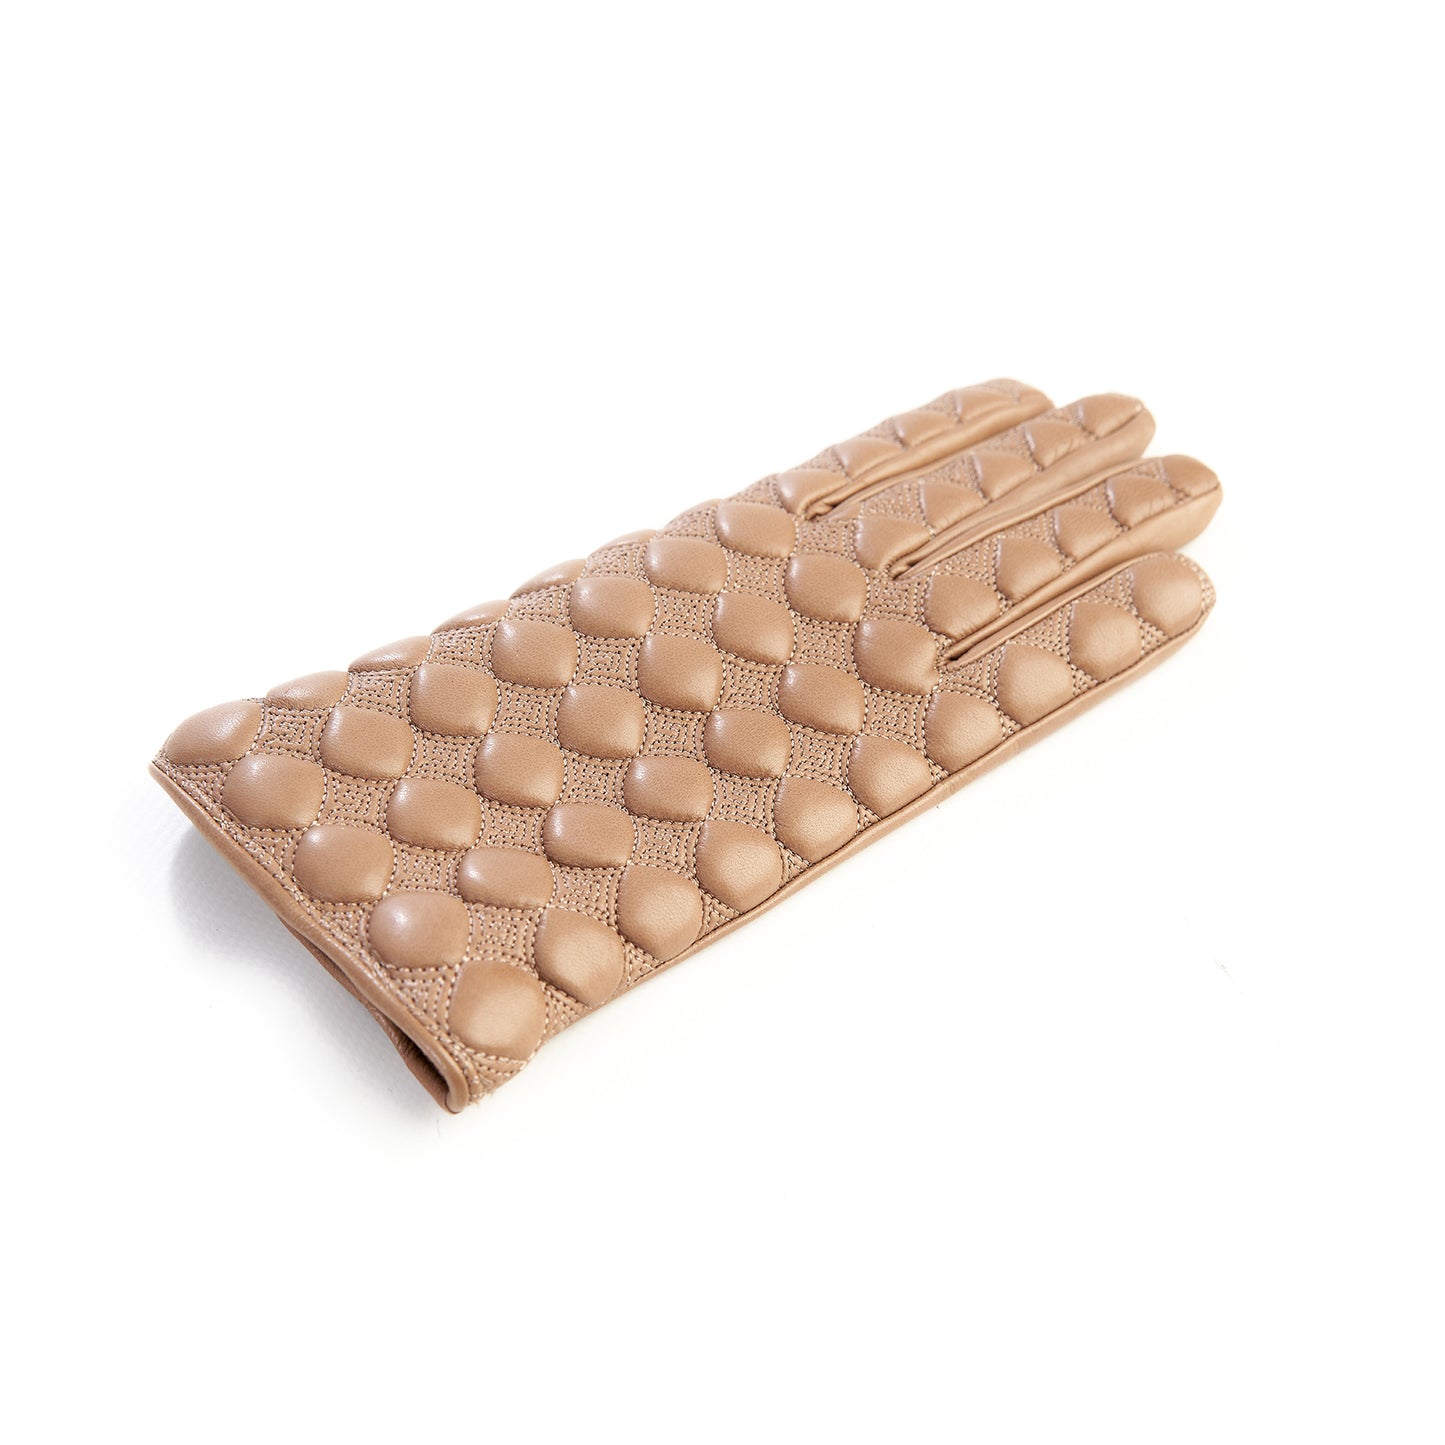 Women's quilted beige leather gloves with cashmere lining